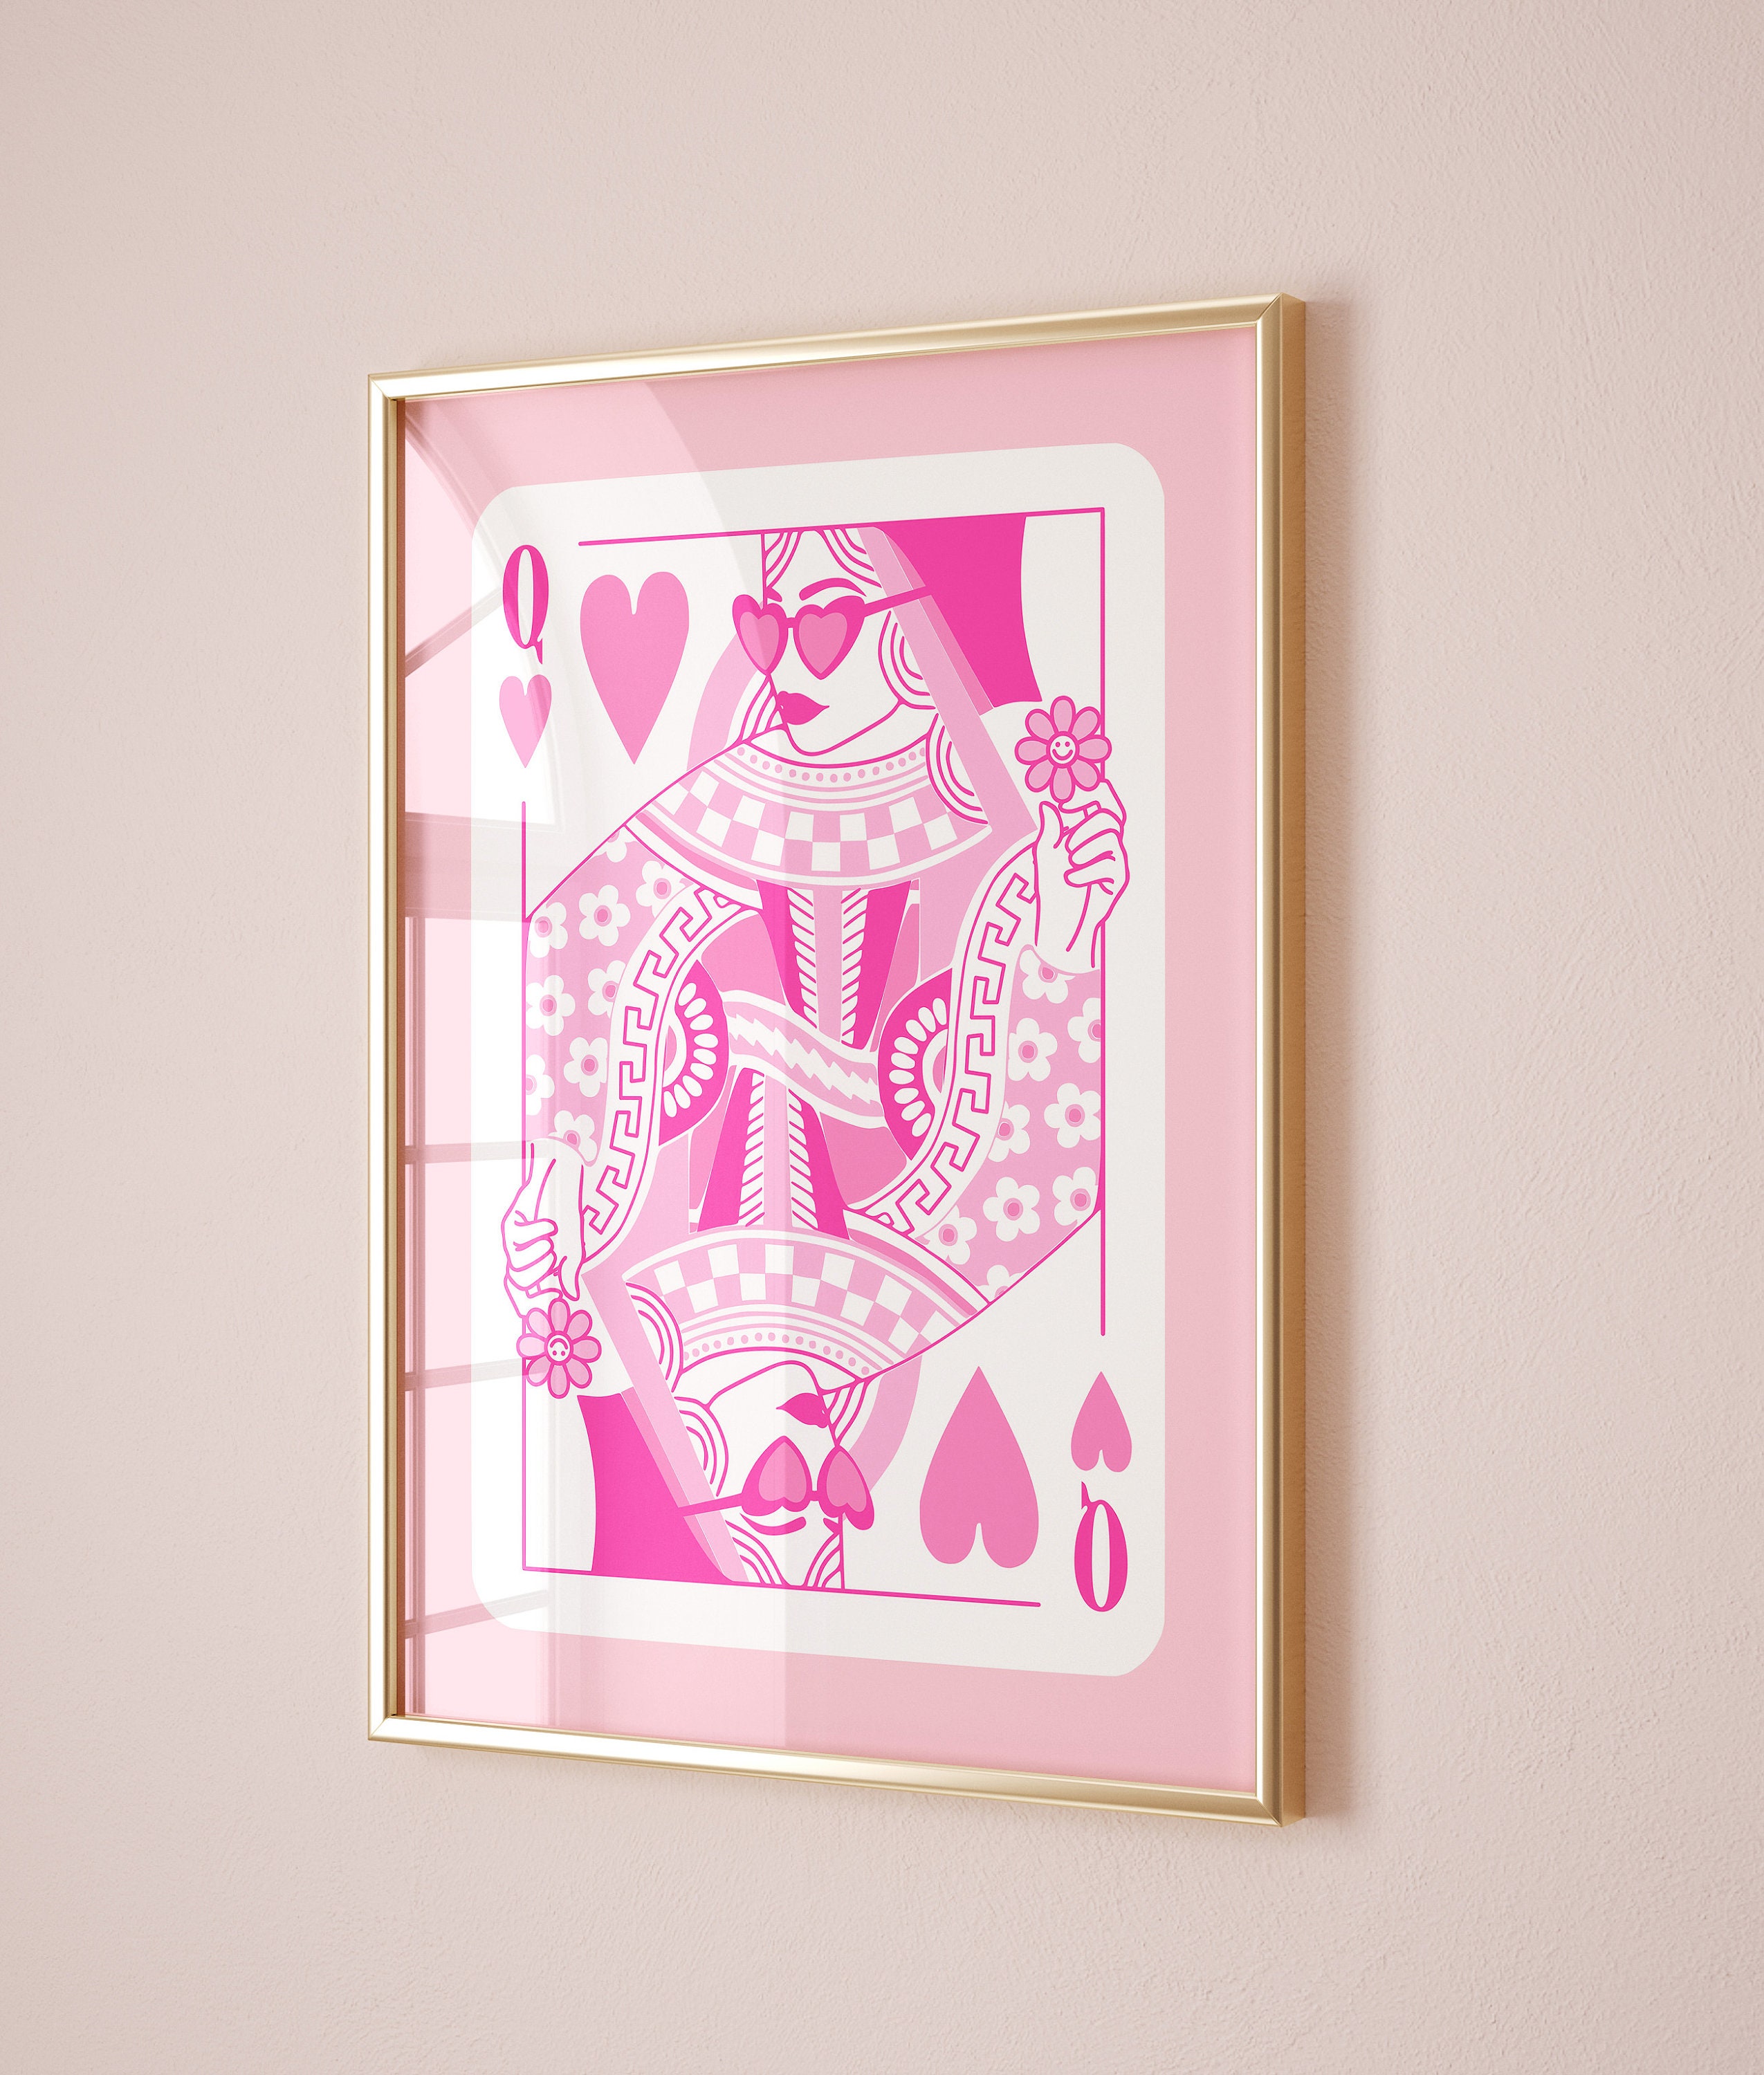 Discover queen of hearts retro wall art girly room decor aesthetic